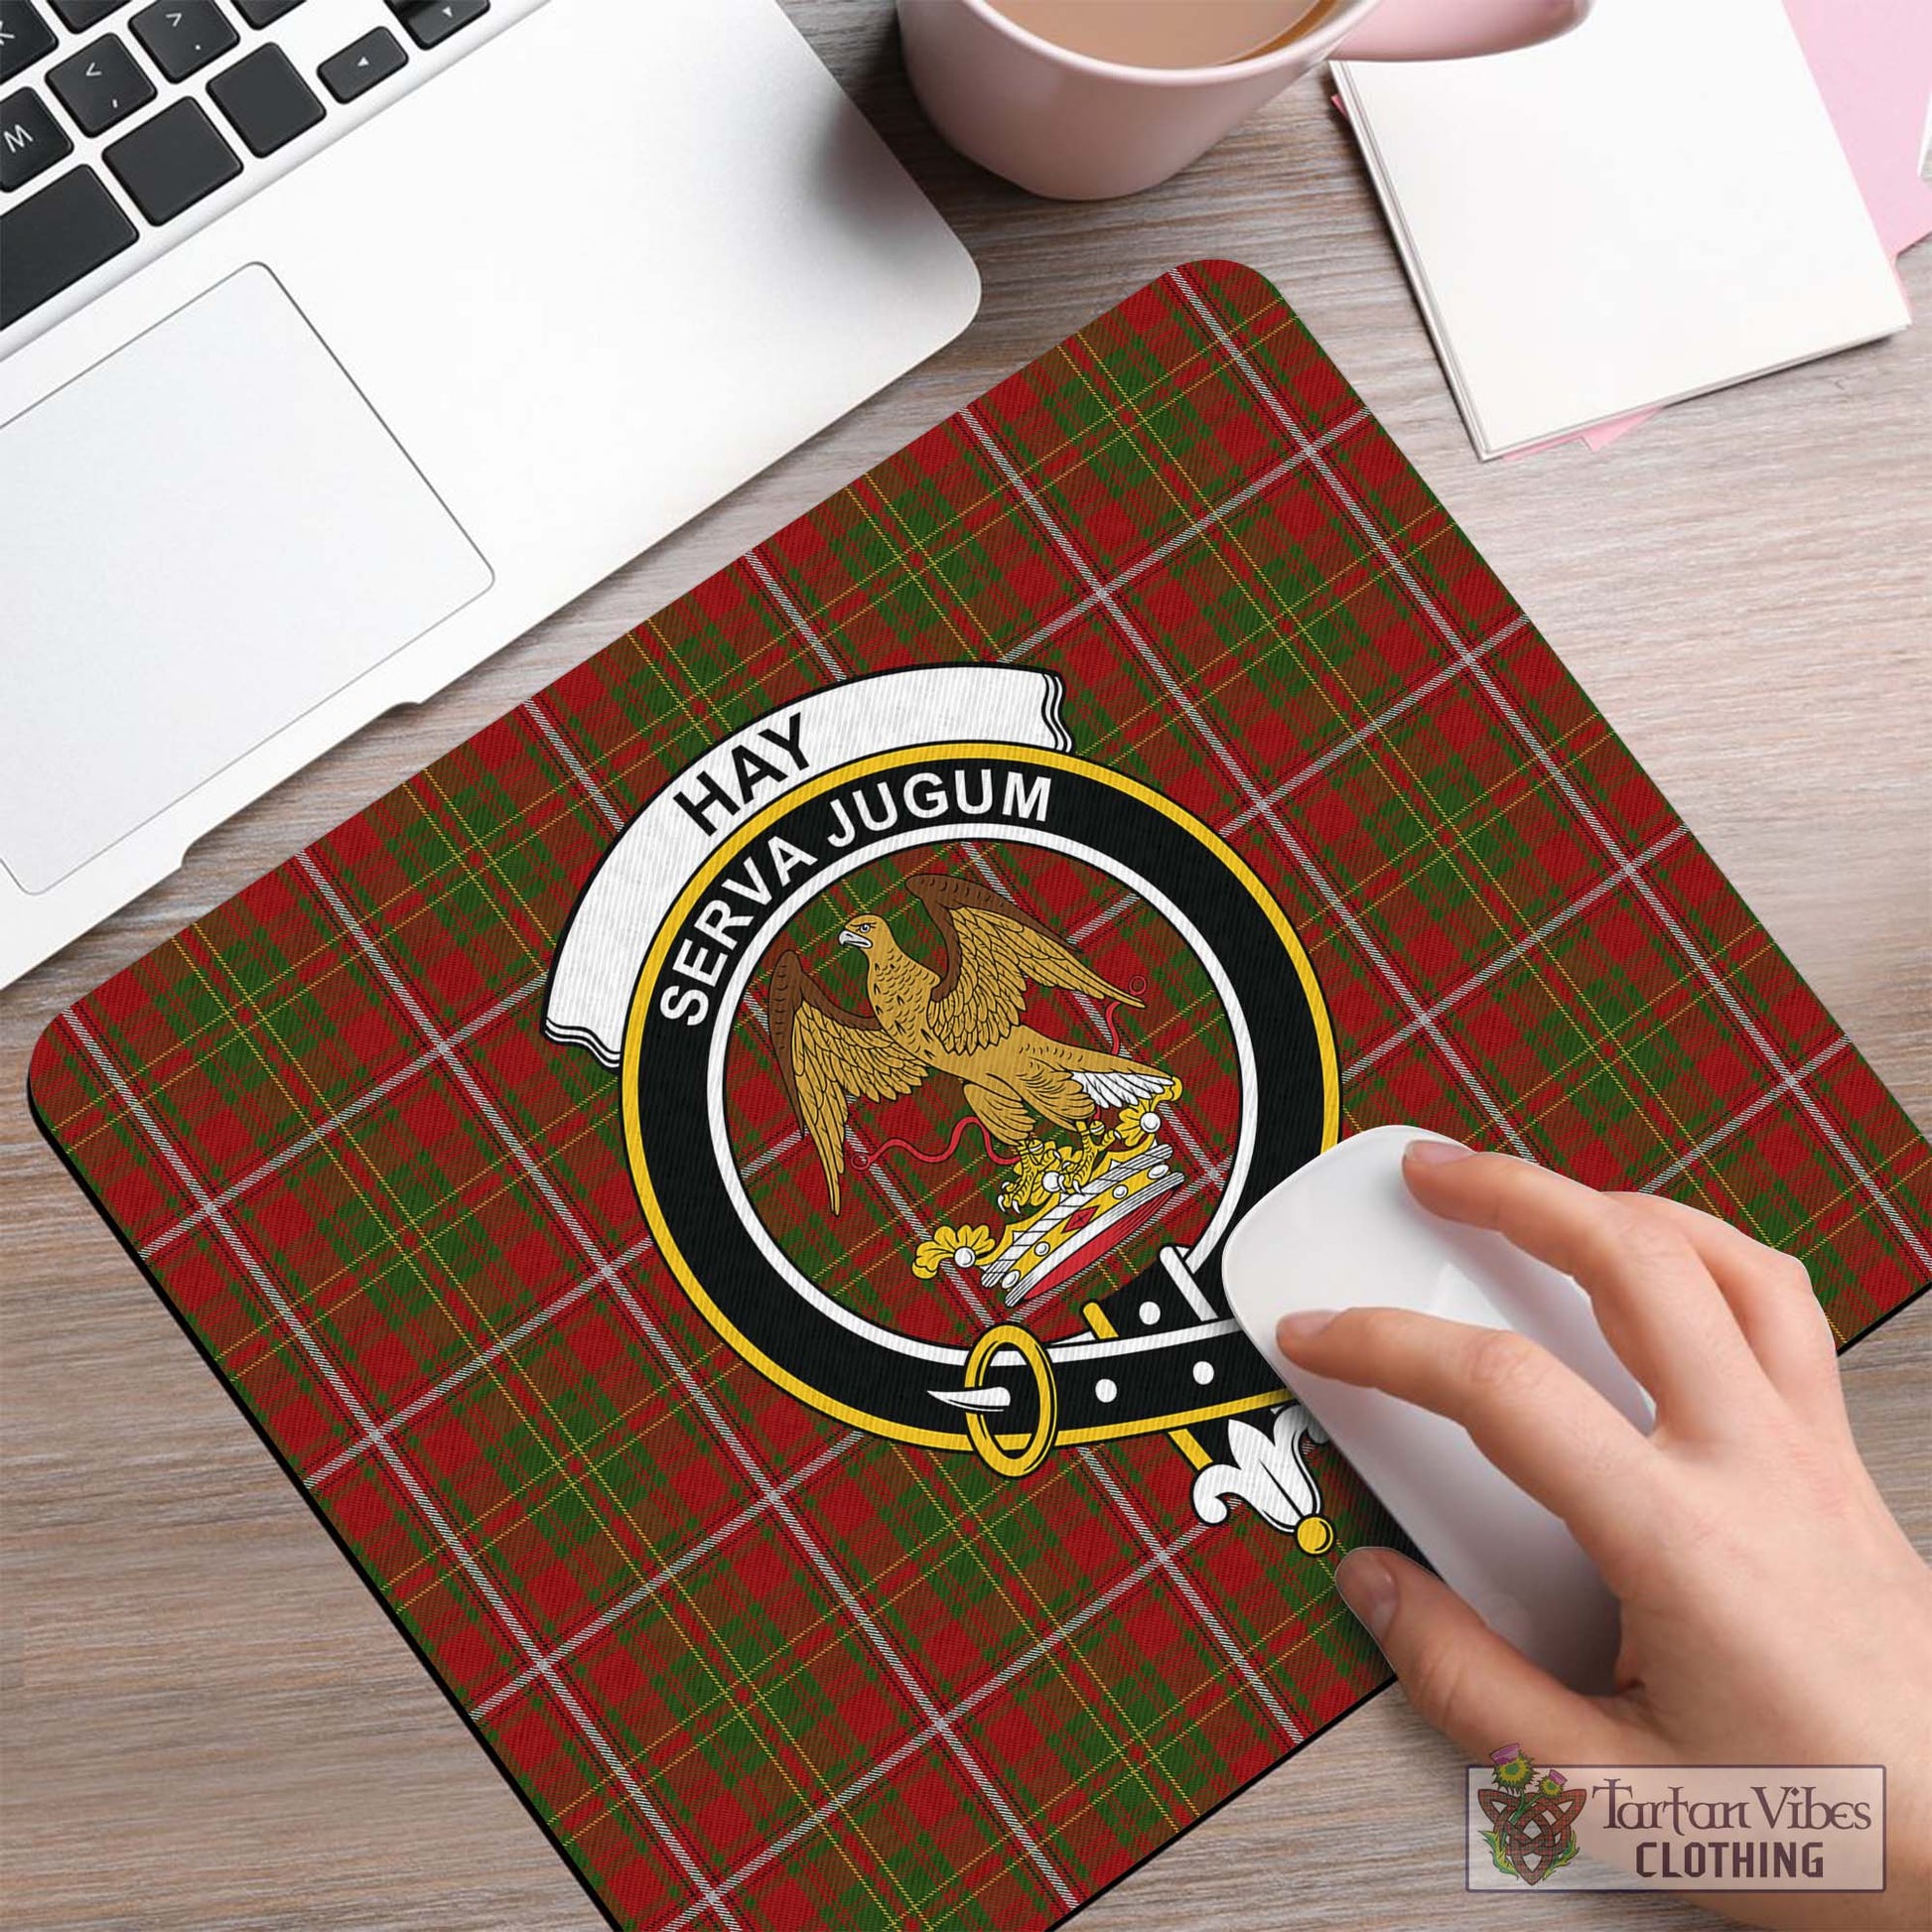 Tartan Vibes Clothing Hay Tartan Mouse Pad with Family Crest